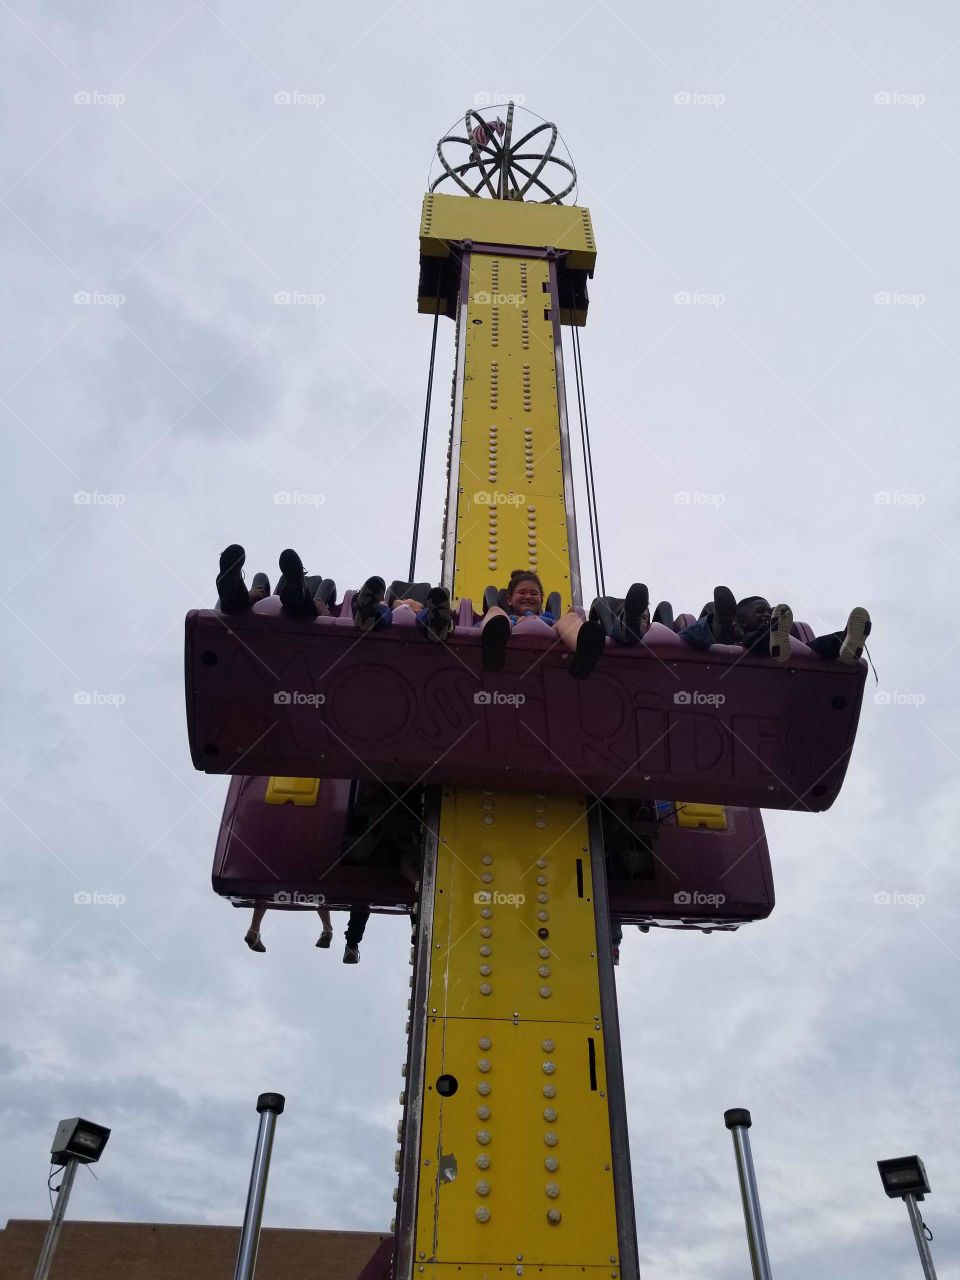 fair picture. daughter on a ride..adrenaline  rush.